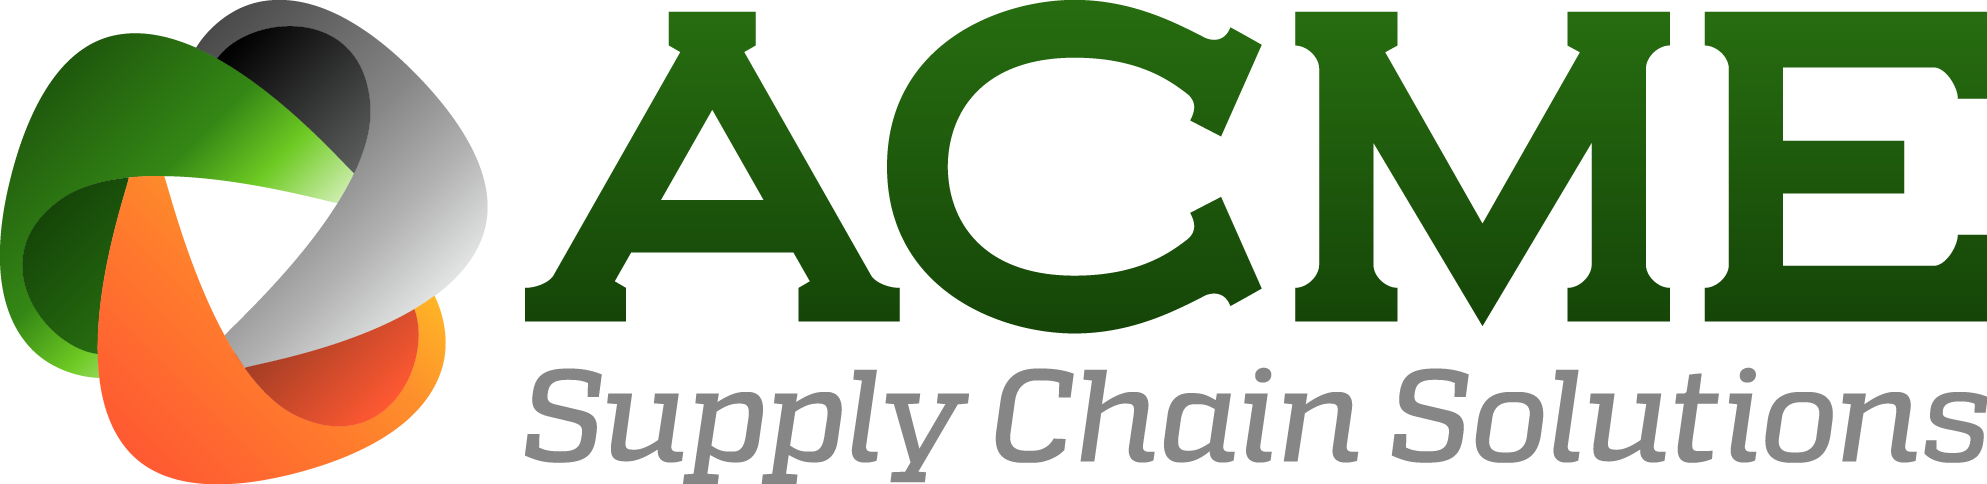 Acme Supply Chain Solutions